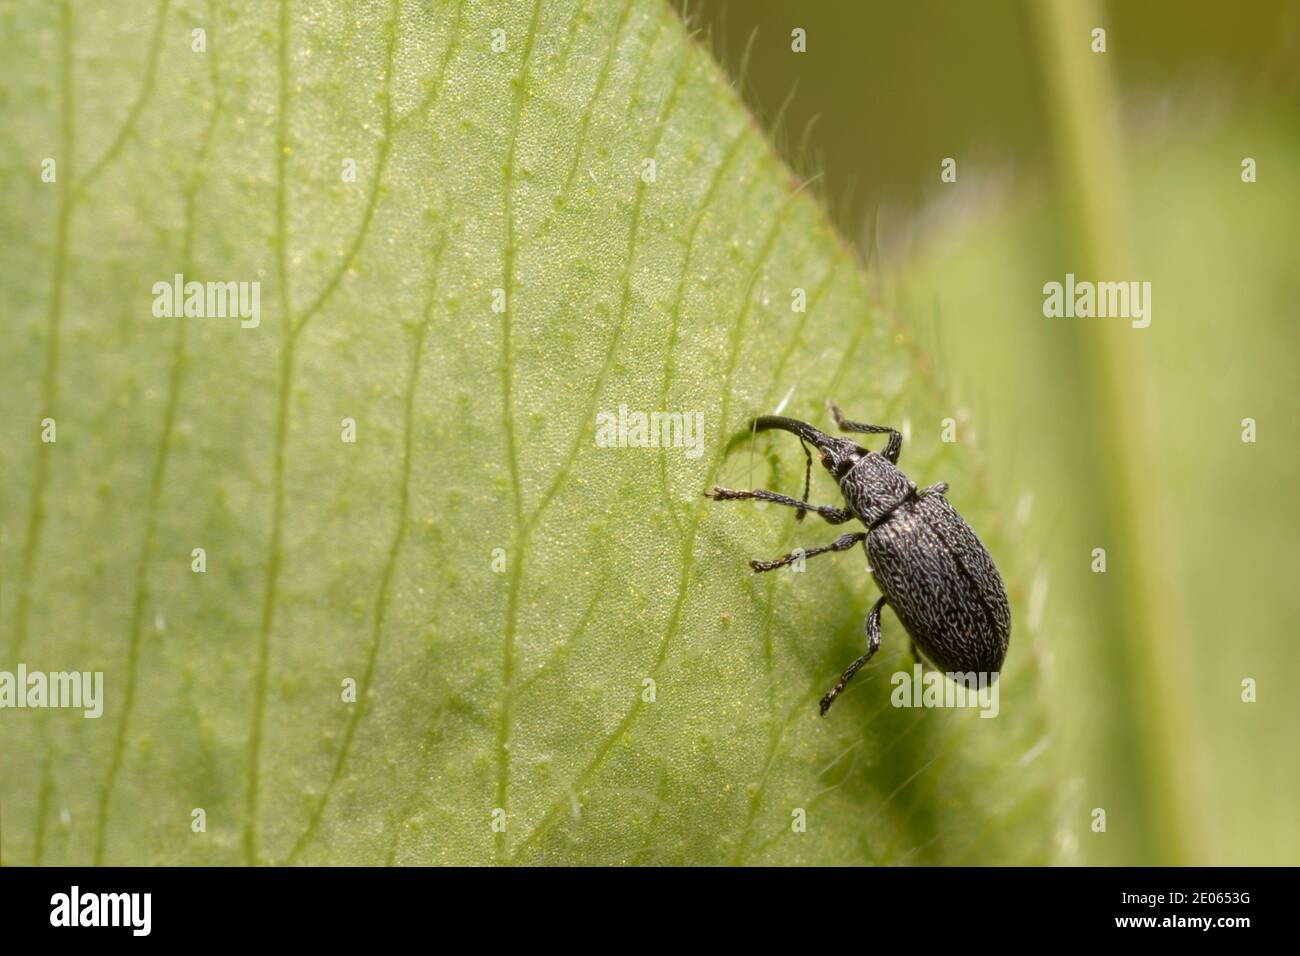 Weevil eating green leaf in a forest Stock Photo